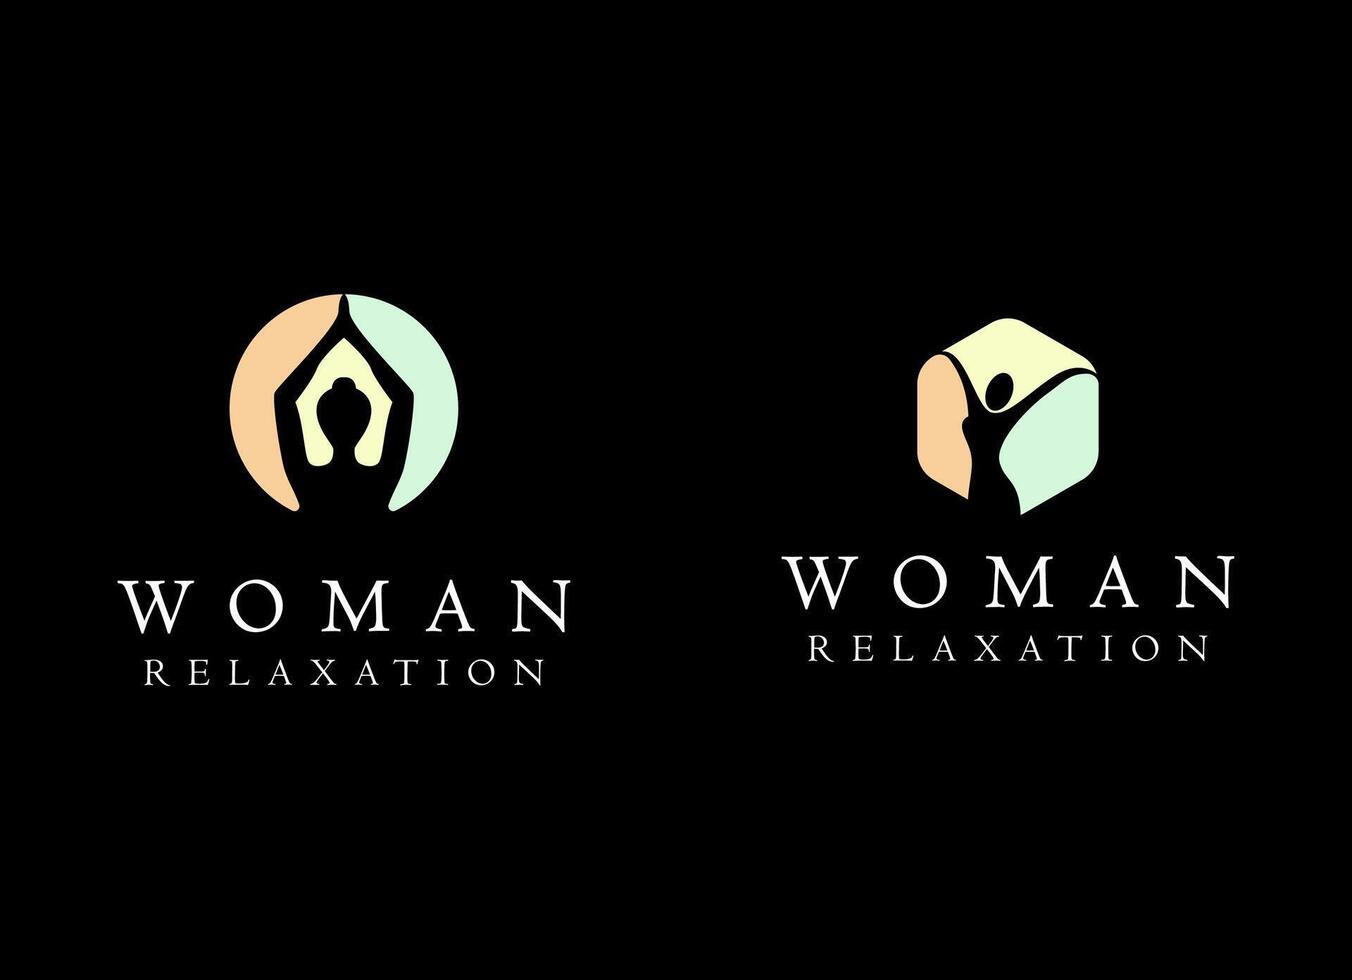 Colorful Silhouette Woman Wellness, Success, Empowered and Health logo design vector